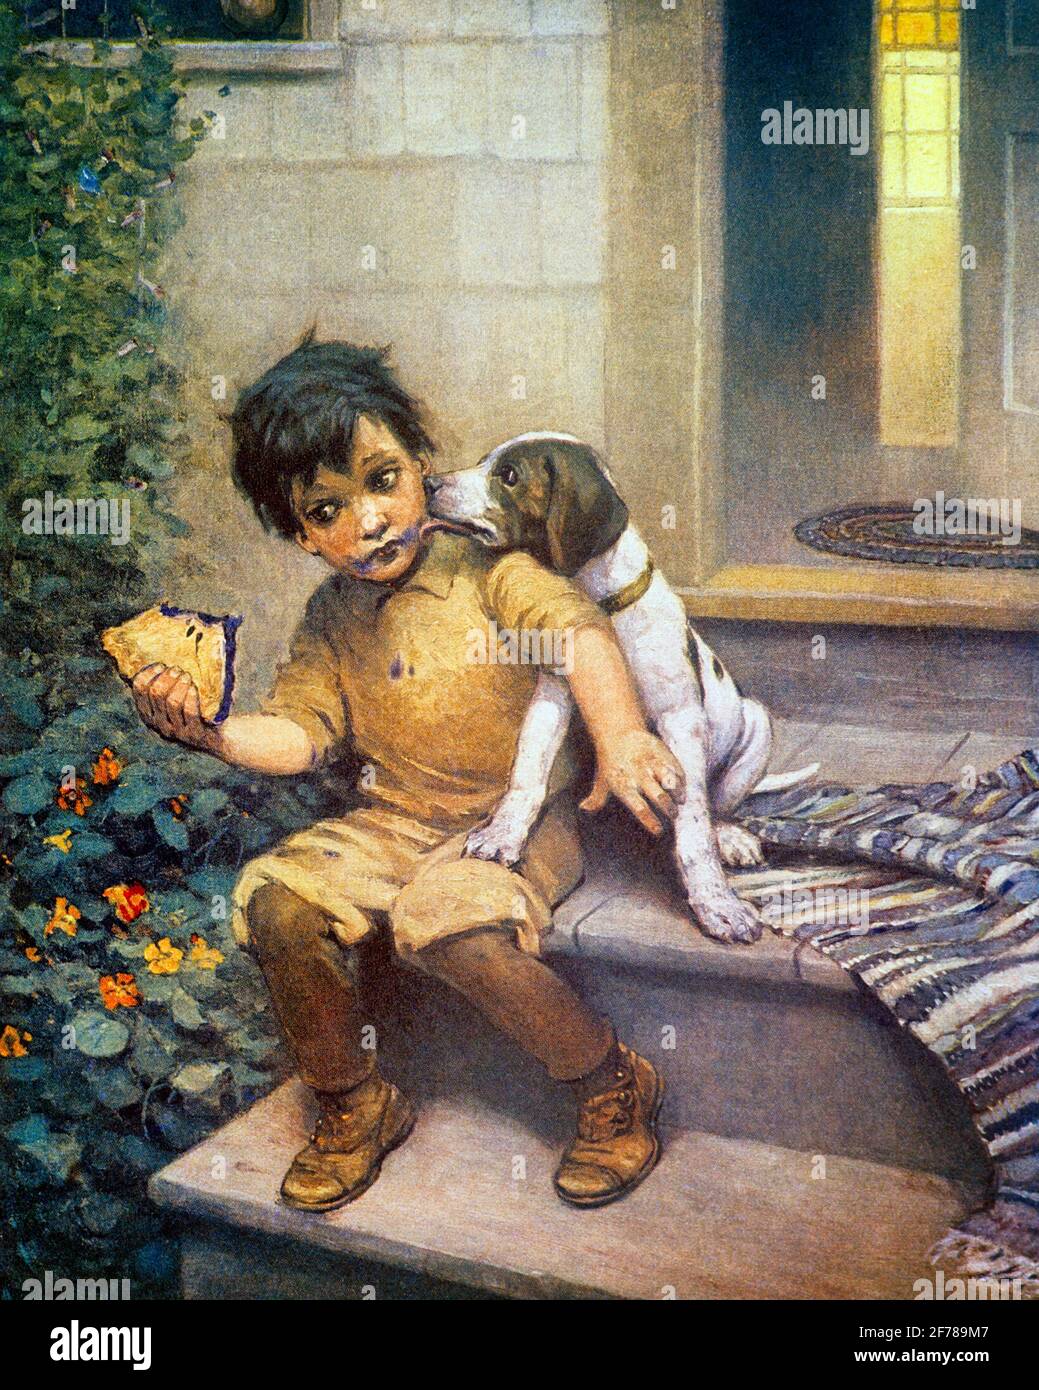 1910s LOVE OR PIE BOY SITTING DOOR STEP EATING PIECE BERRY PIE TRYING TO KEEP DOG FROM LICKING HIS FACE LIFE ISSUE DECEMBER 1912 - kh13527 NAW001 HARS HEALTHINESS HOME LIFE BEGGING COPY SPACE FRIENDSHIP FULL-LENGTH CARING MALES PETS TEMPTATION LICKING HAPPINESS MAMMALS HIS STRATEGY CANINES EXCITEMENT TRYING OF OPPORTUNITY DECEMBER POOCH CONNECTION KEEP CONCEPTUAL BERRY ISSUE STYLISH OR CANINE GROWTH JUVENILES MAMMAL RELAXATION TOGETHERNESS 1912 CAUCASIAN ETHNICITY OLD FASHIONED Stock Photo